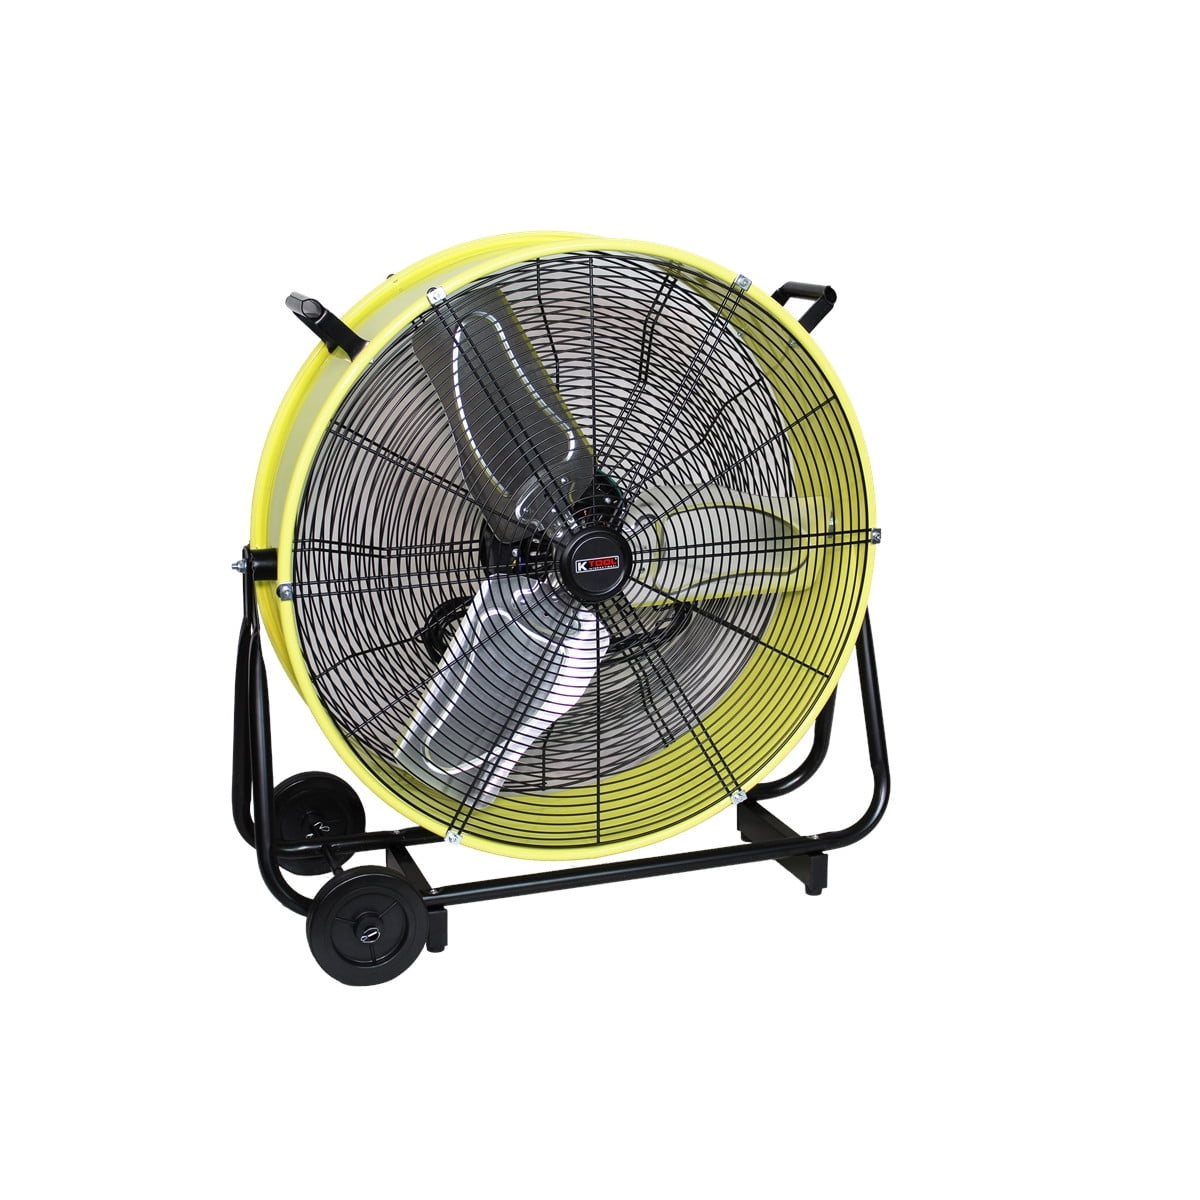 STANLEY High Velocity Electric Direct Drive Floor Fan 12' Yellow Black NEW 